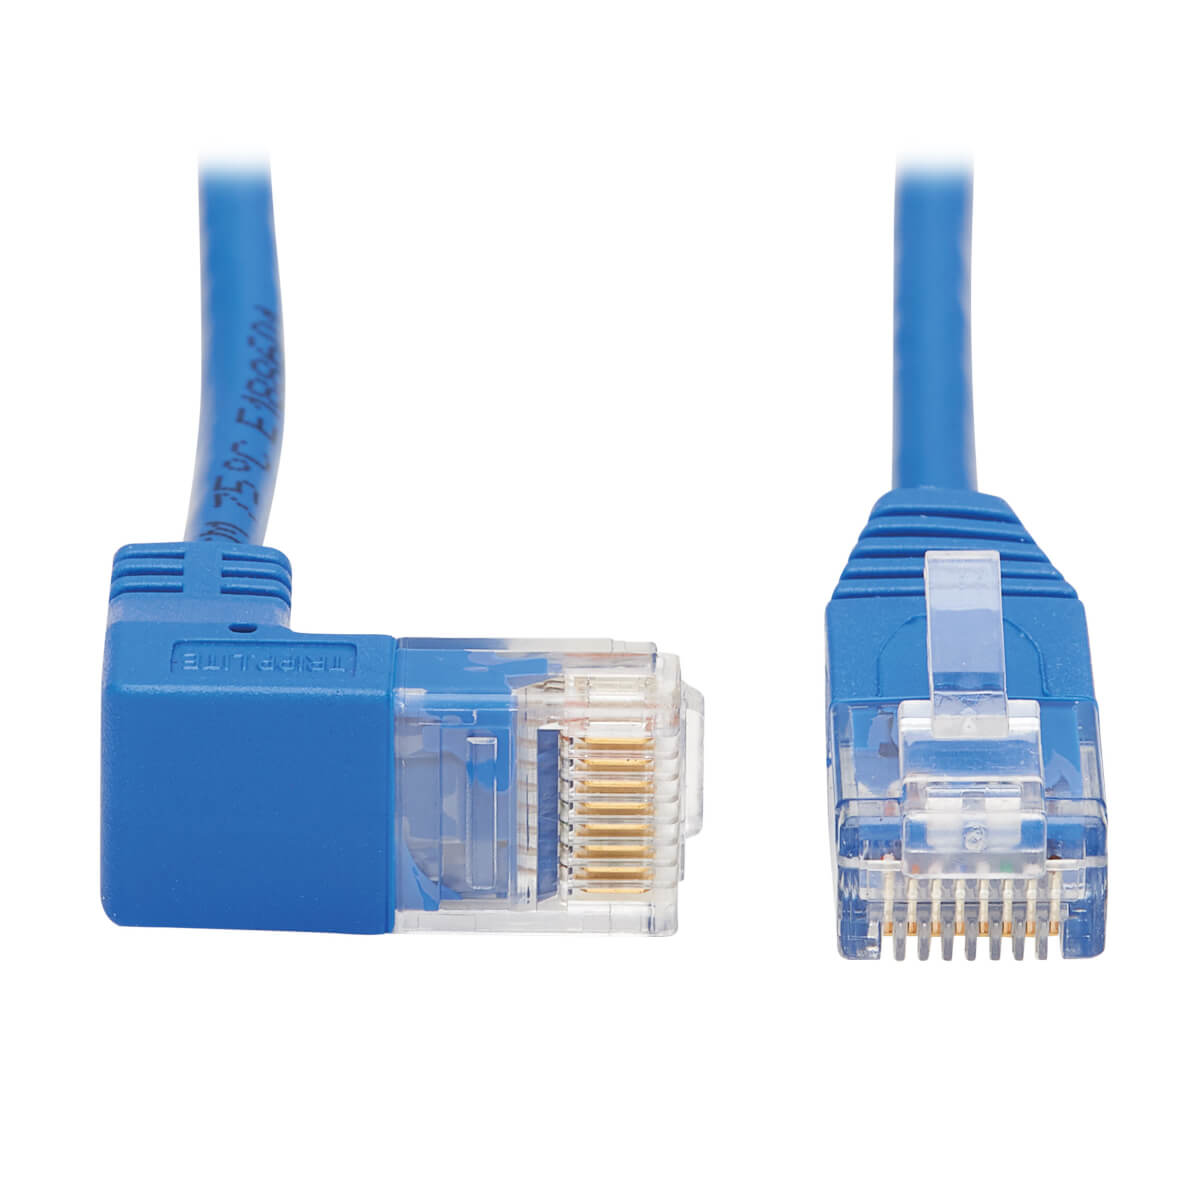 7 ft Tripp Lite CAT6 Snagless Patch Cable Blue 